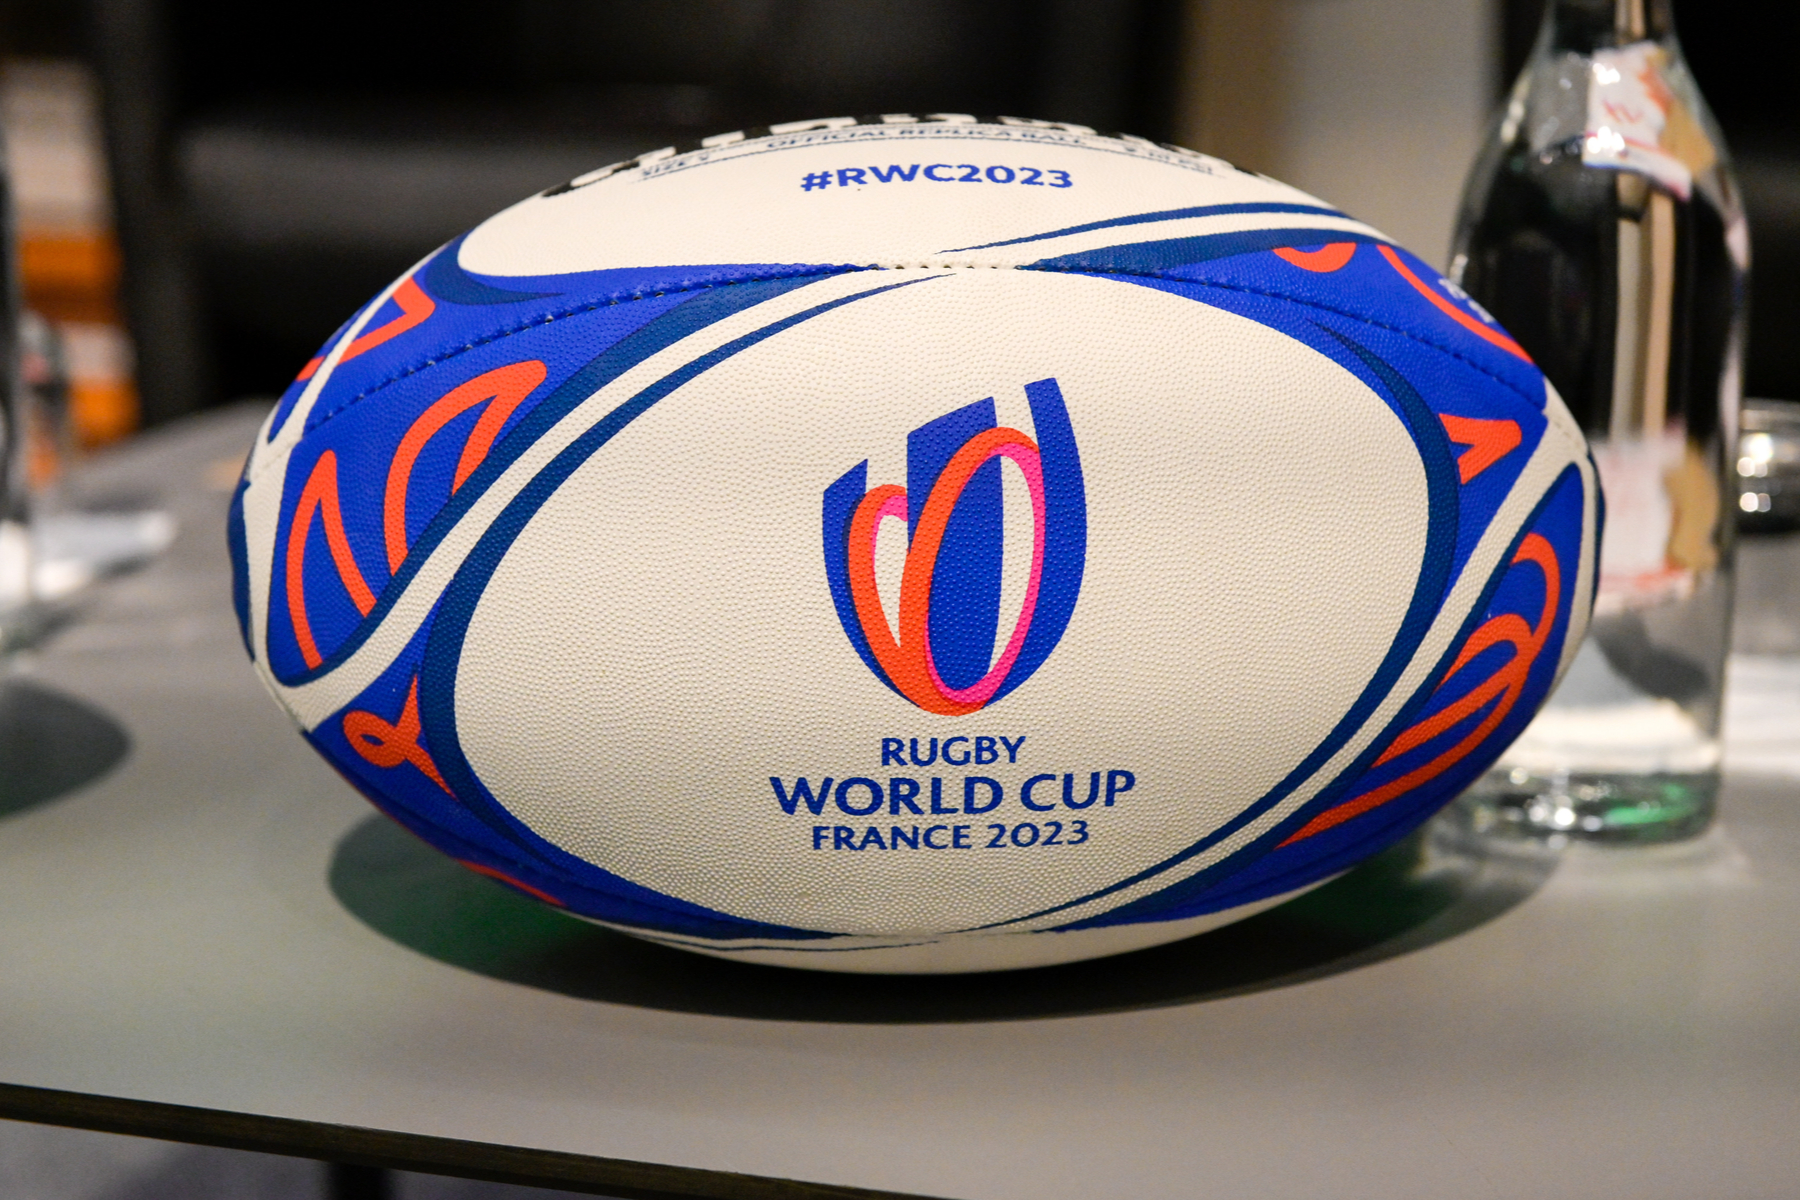 6 months to go: 5 things to look forward to at the 2023 Rugby World Cup